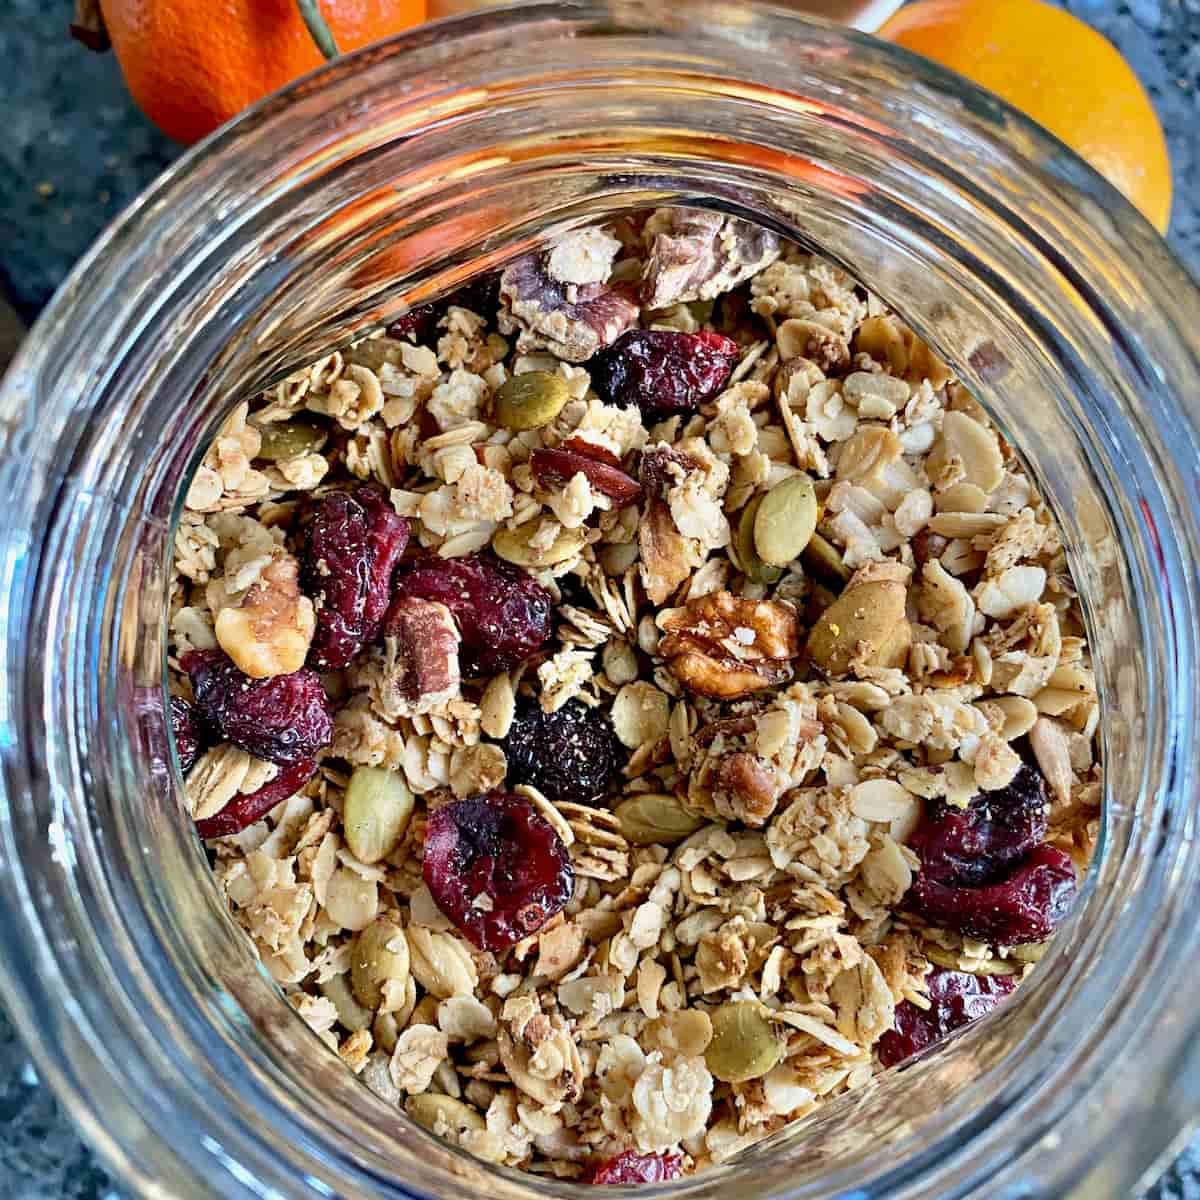 closeup of a glass cookie jar filled with toasted oats, nuts, seeds and dried cranberry fruits